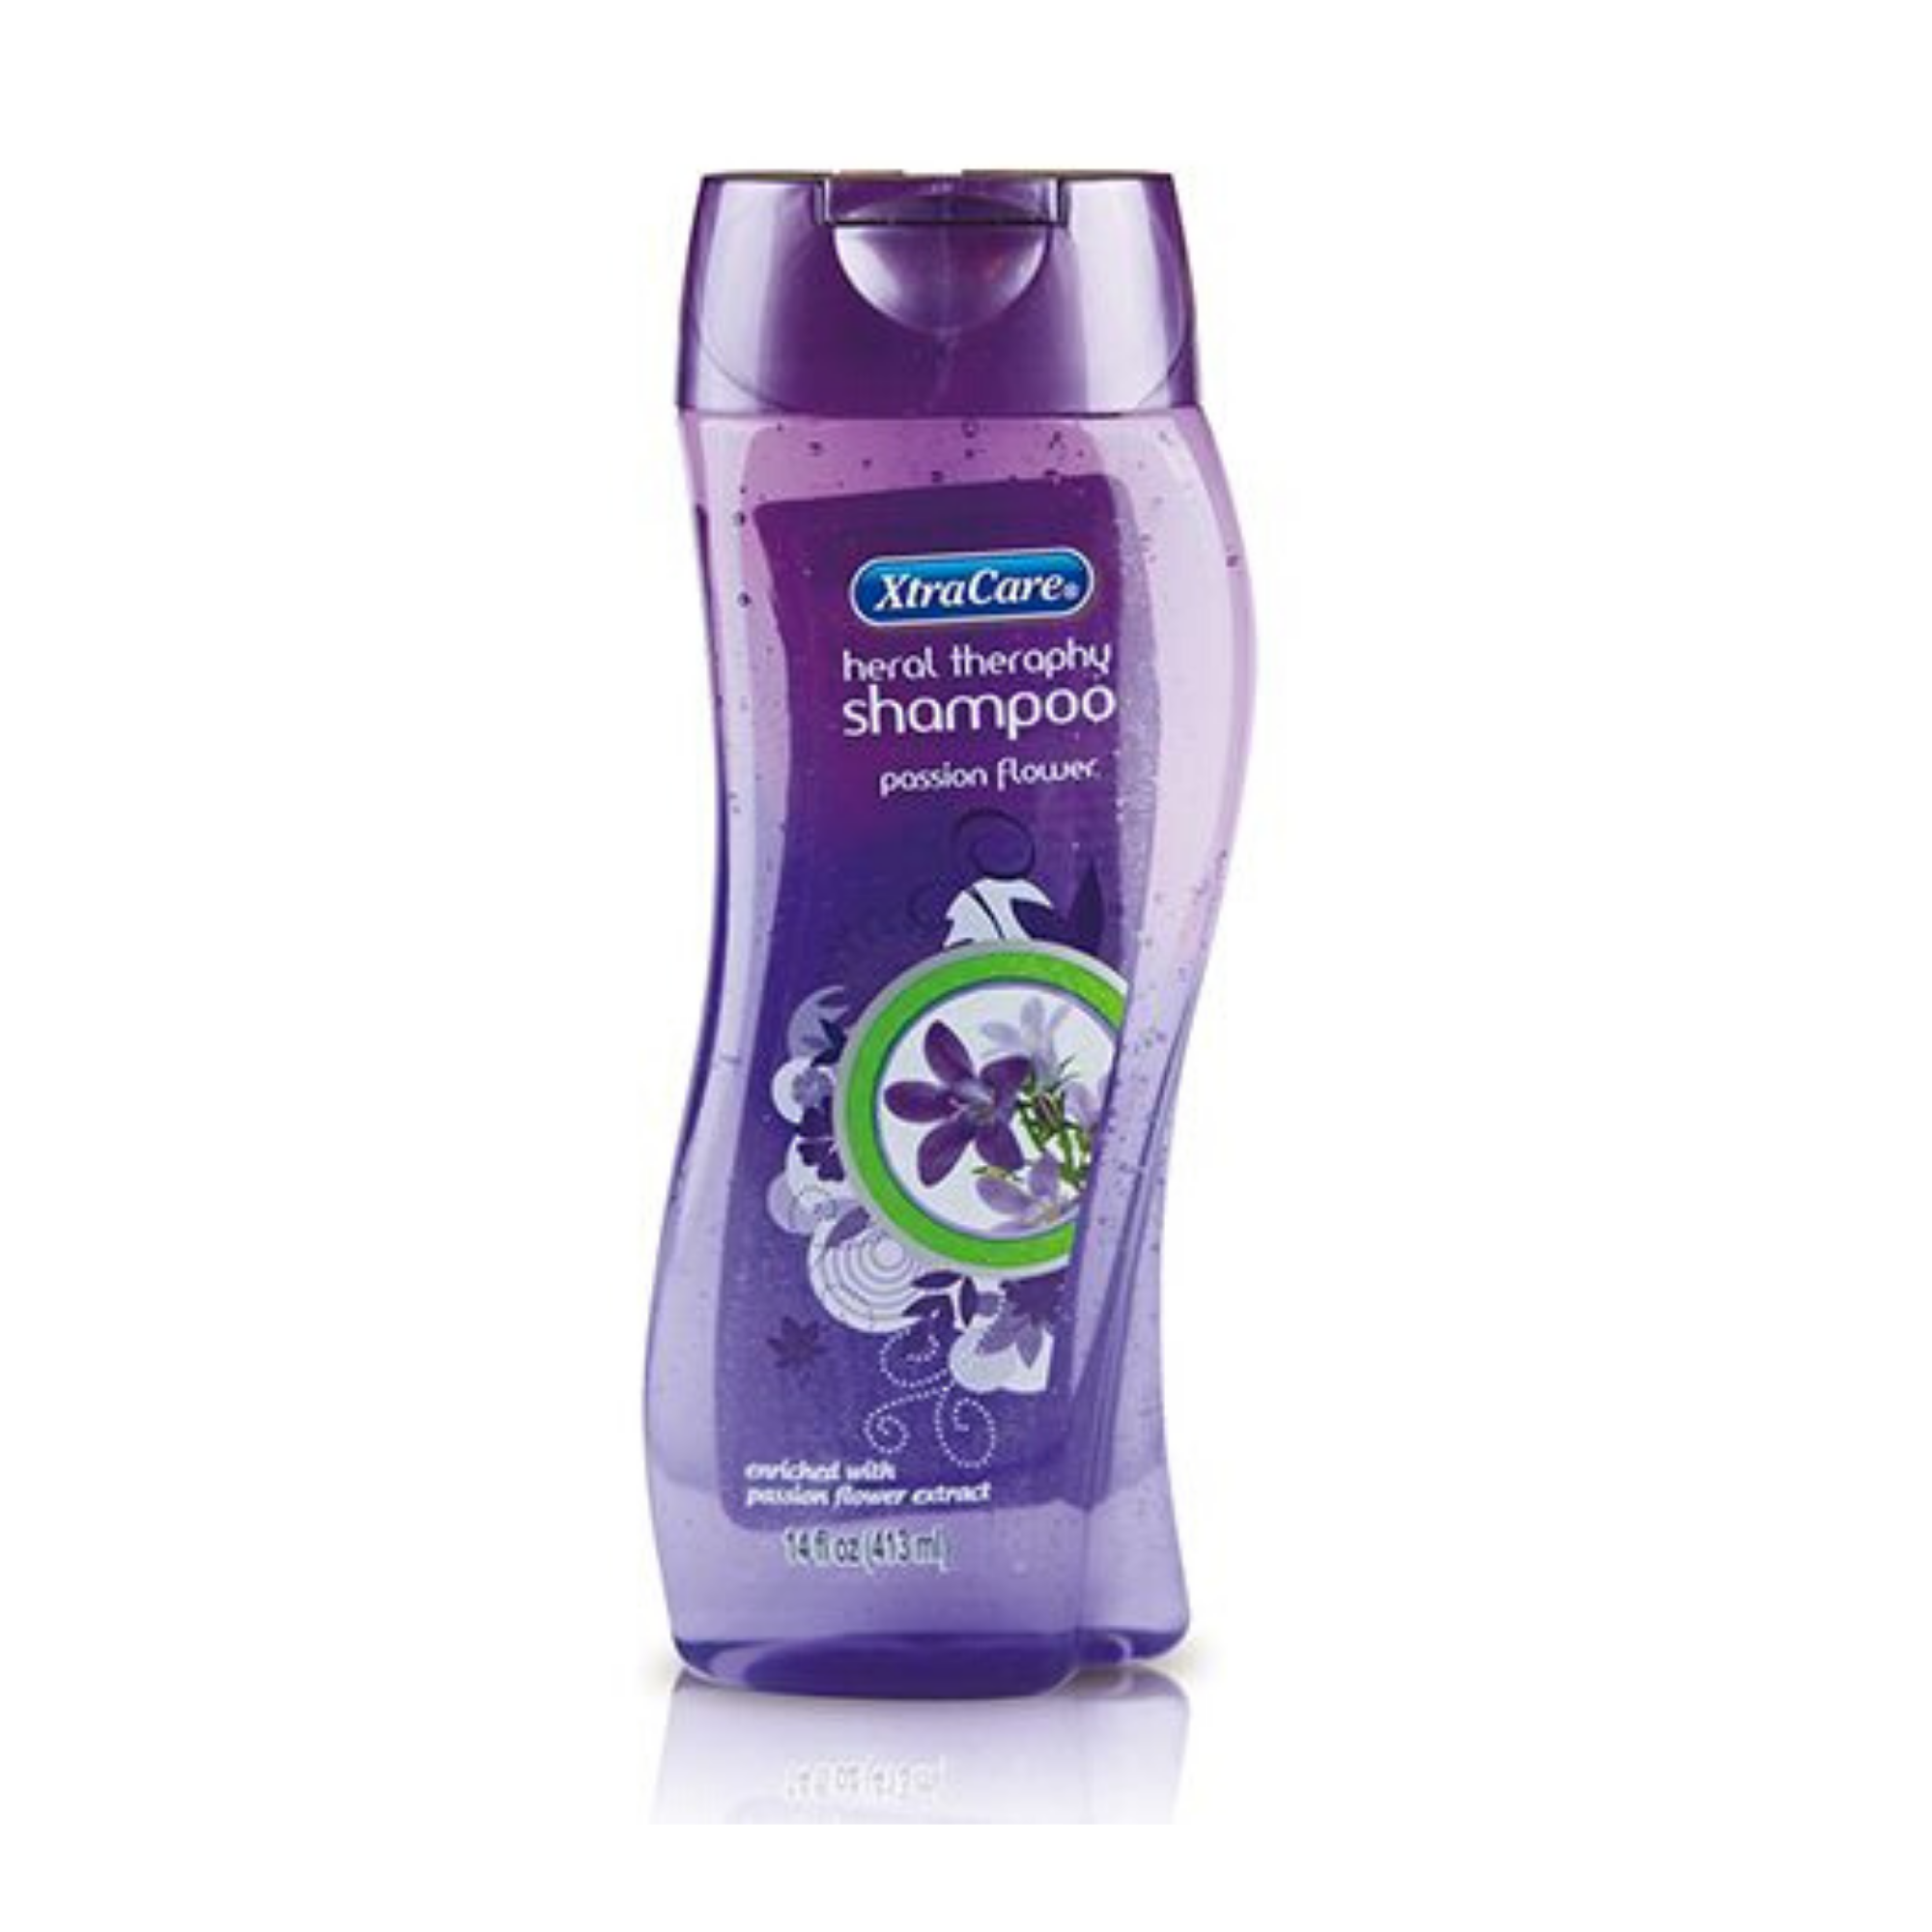 XtraCare Herbal Therapy Shampoo - Passion Flower